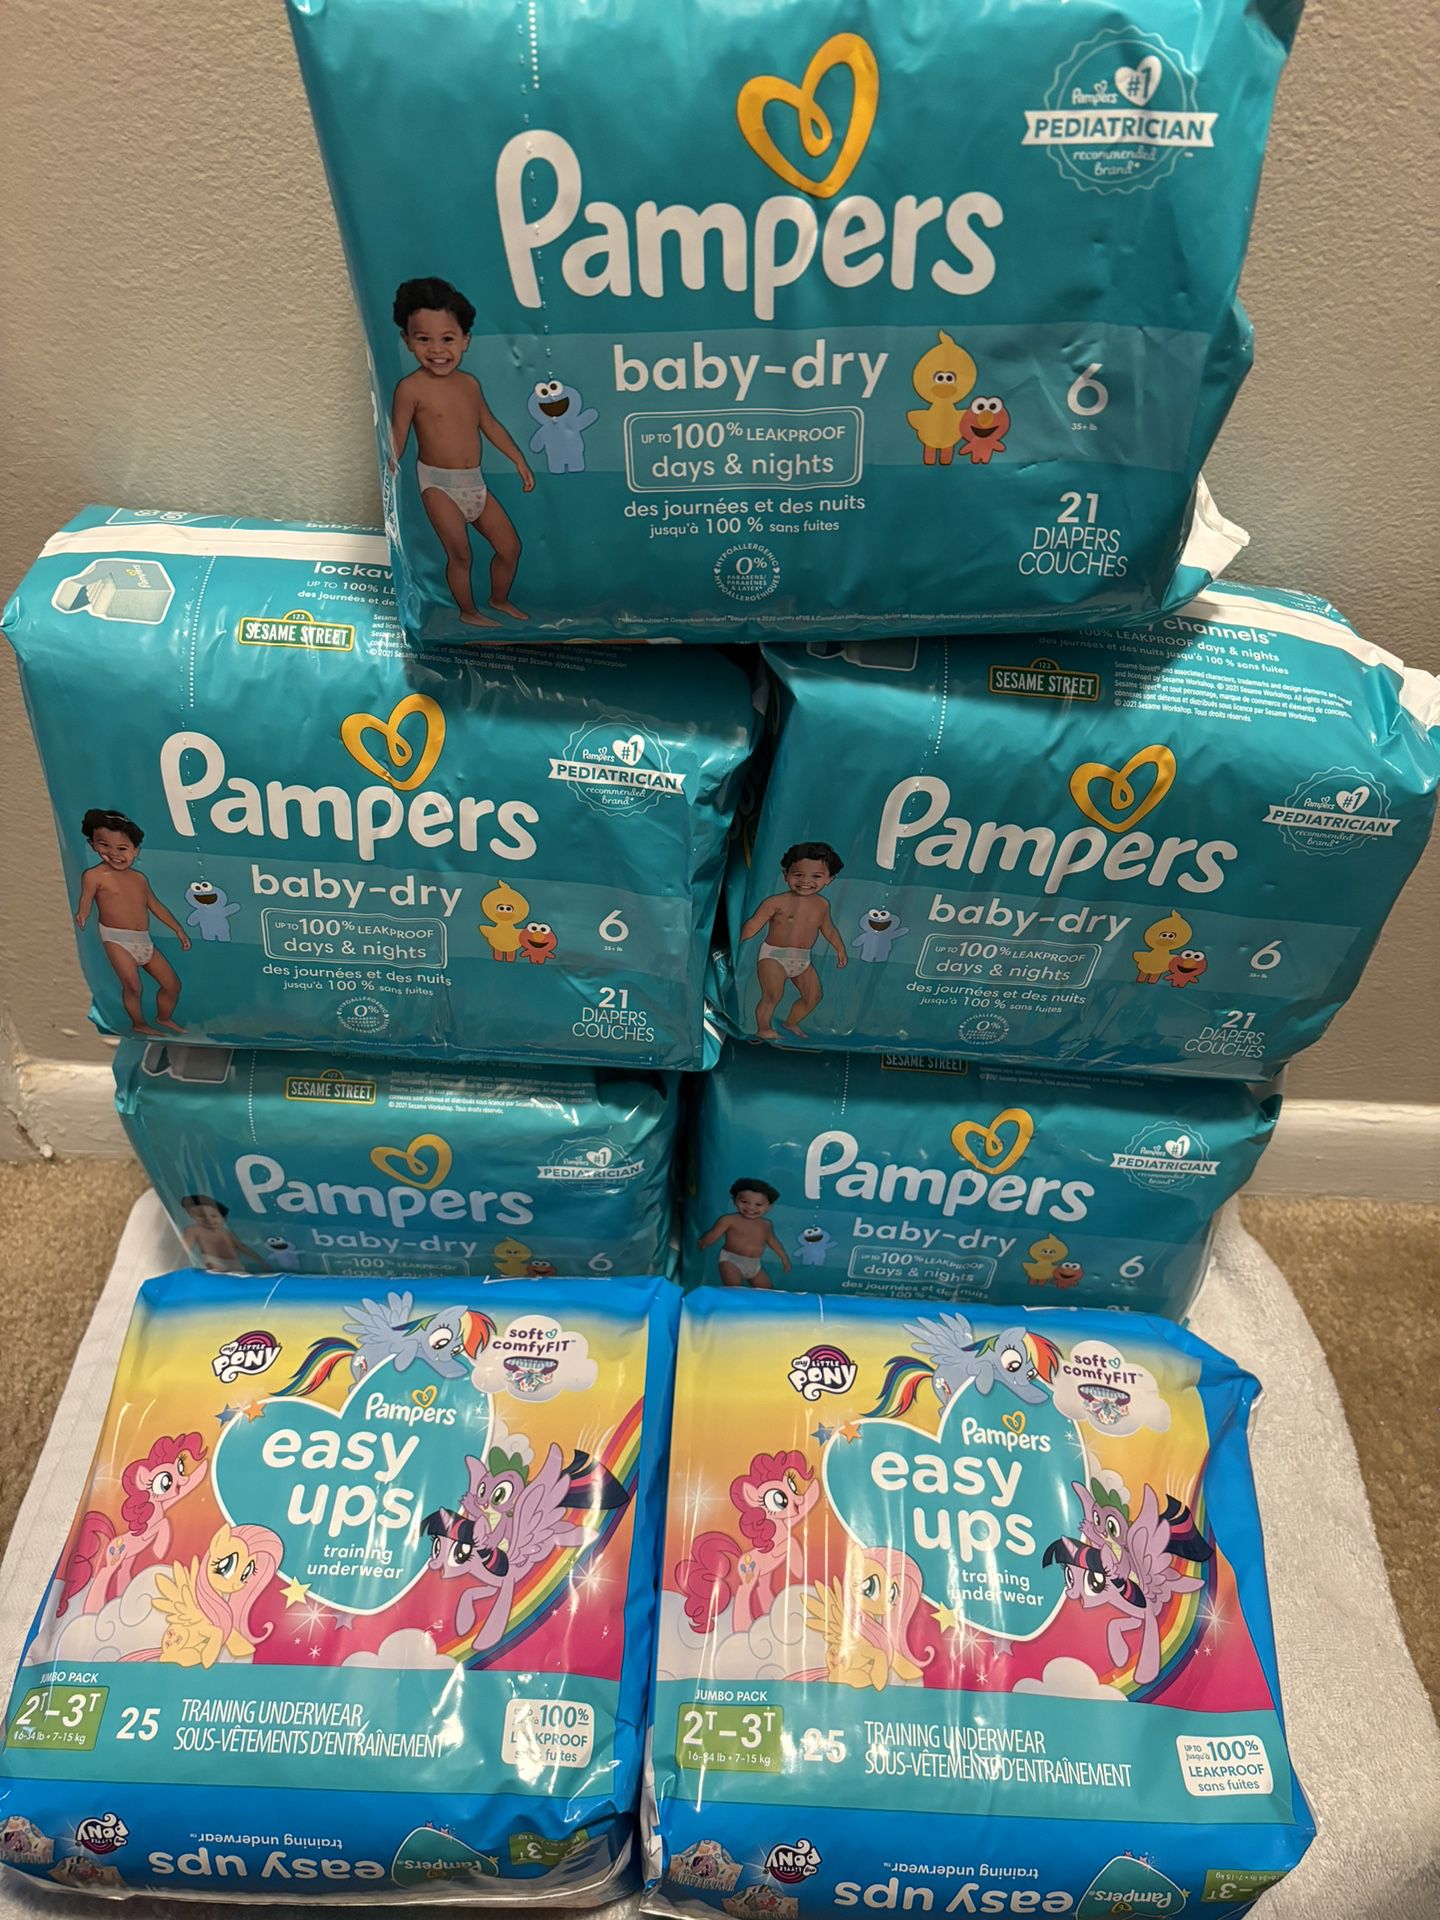 Pampers $6 Each 